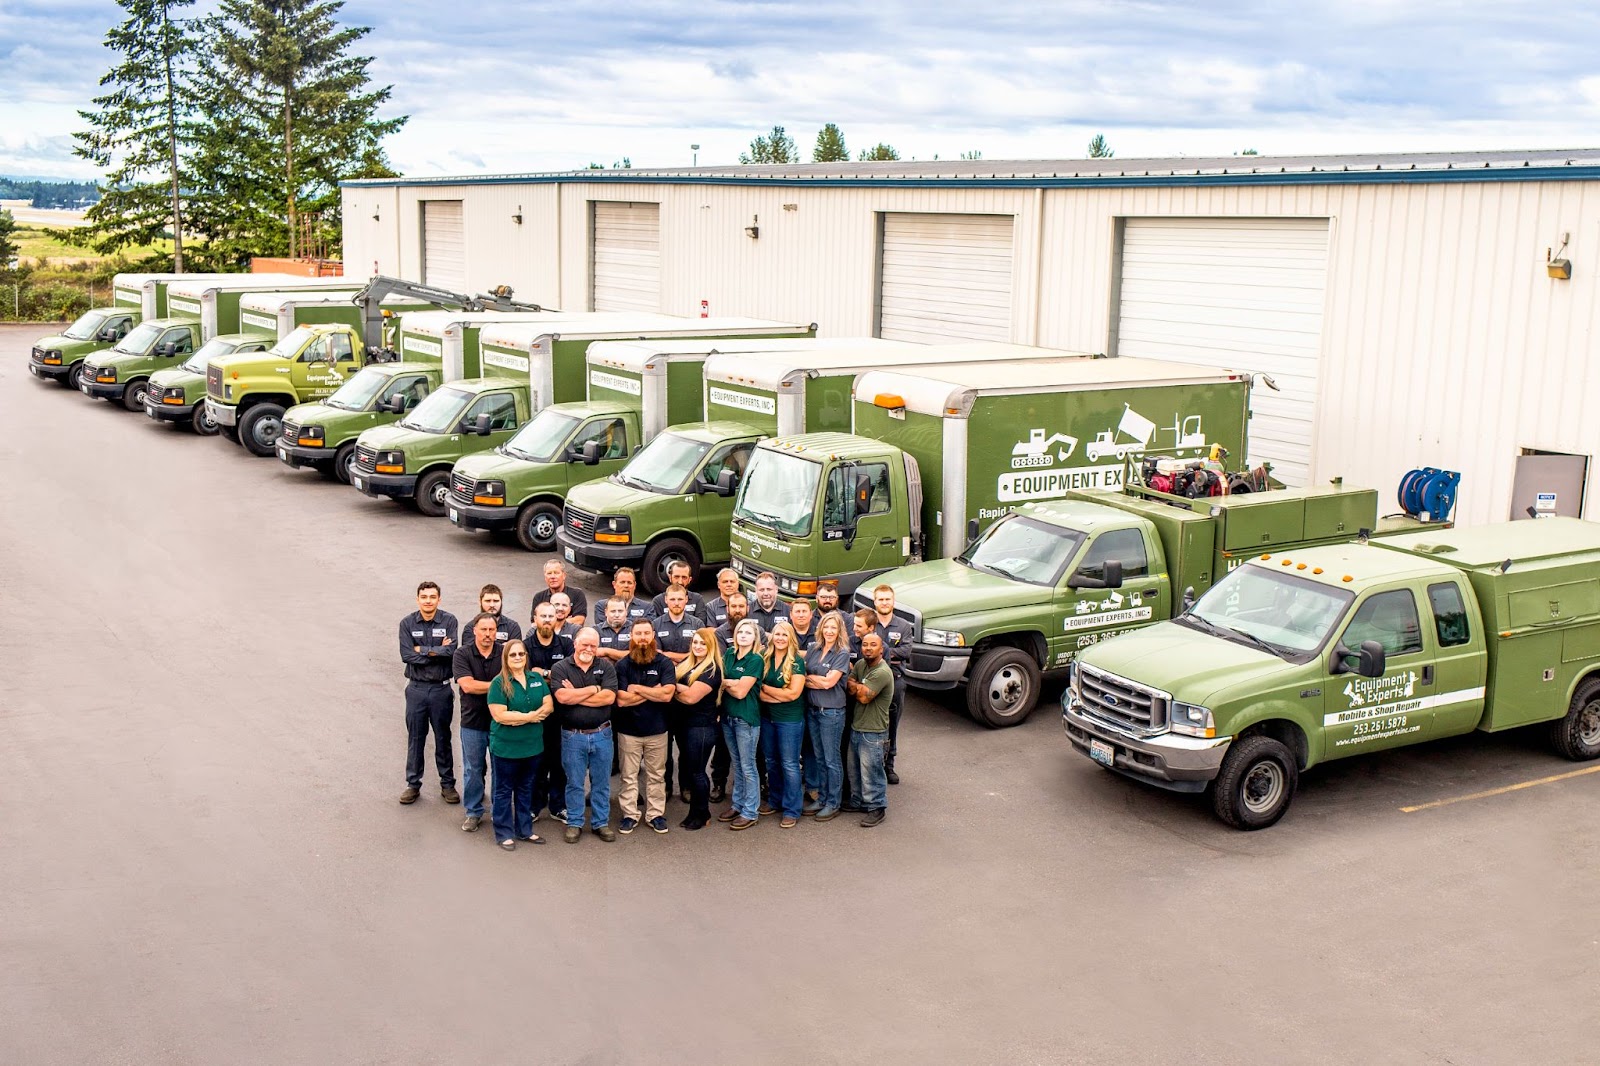 An aerial view of the Equipment Experts, Inc. team with folded arms